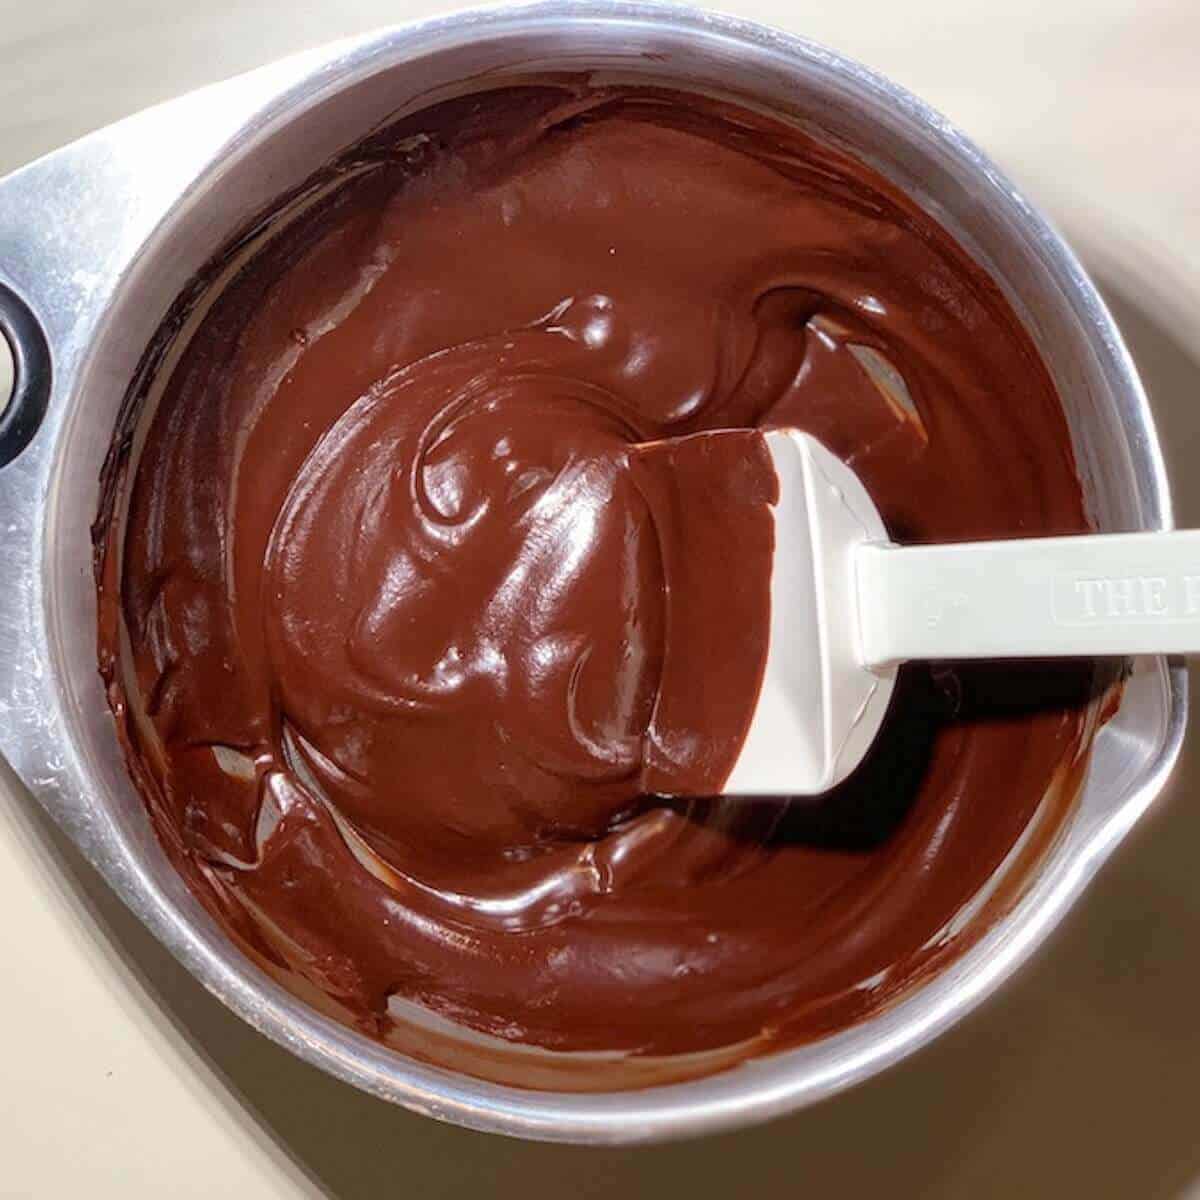 Chocolate ganache in a metal bowl with a white spatula.